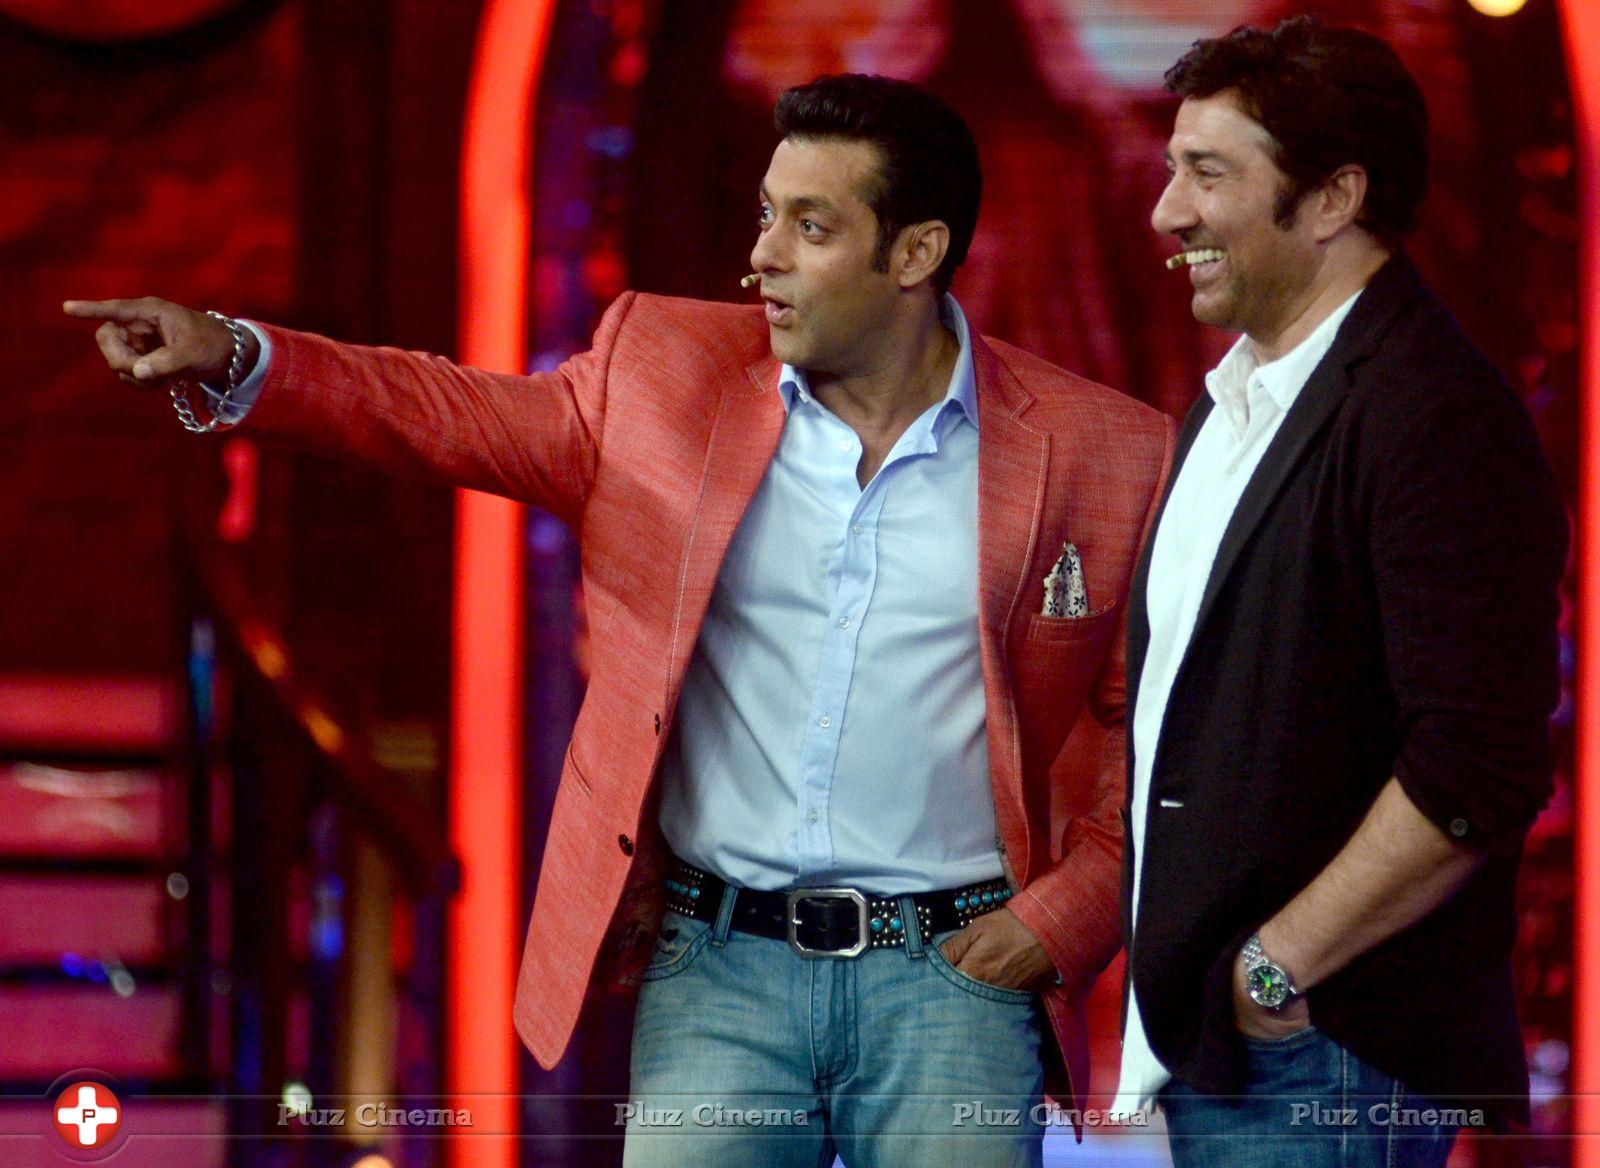 Sunny Deol promotes his film Singh Sahab The Great on the sets of Big Boss With Salman Khan Photos | Picture 633412